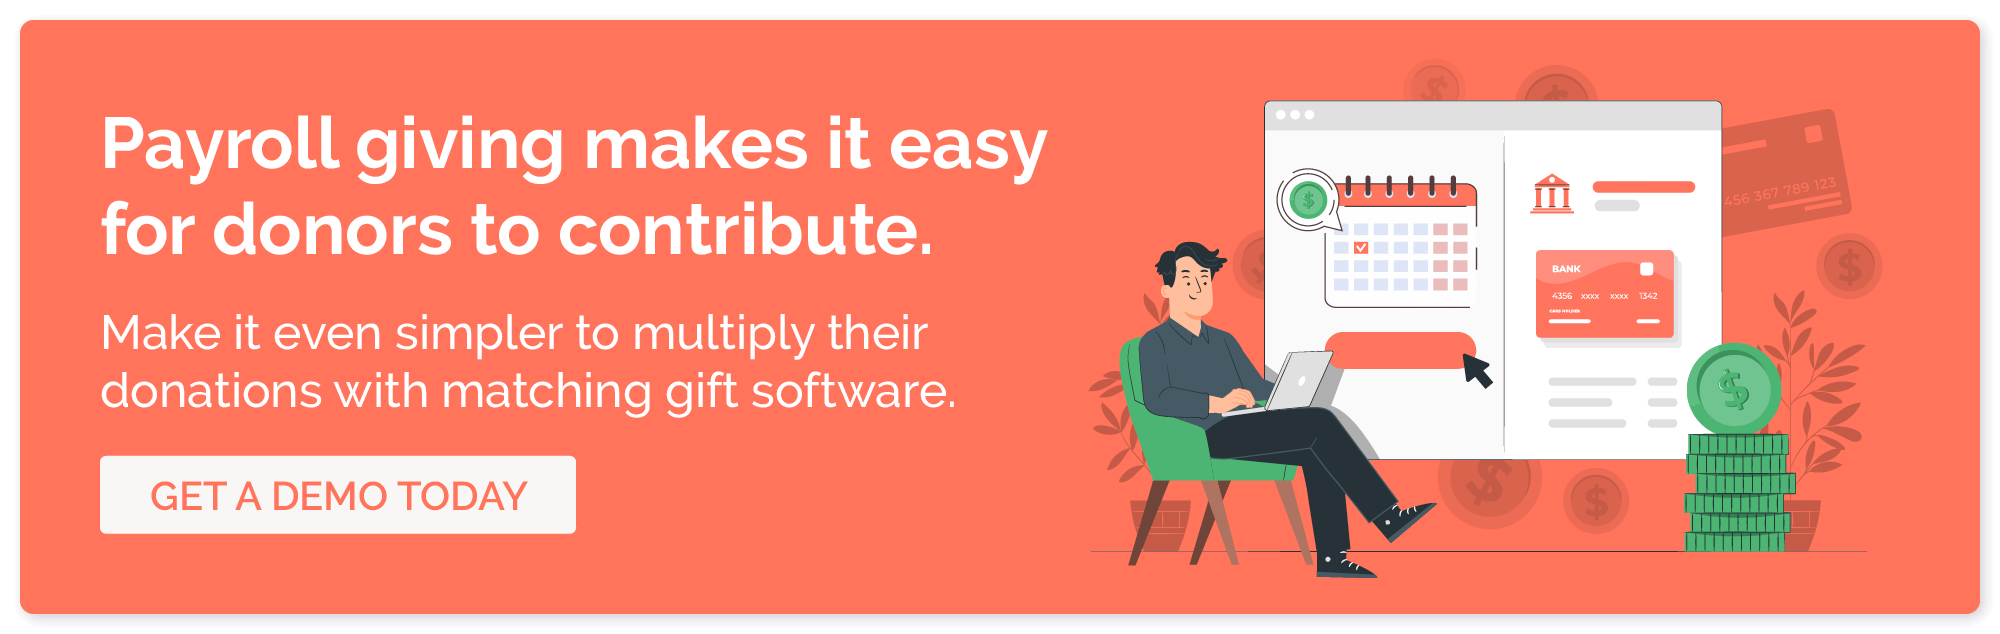 Get a demo of matching gift software to earn more through payroll giving.